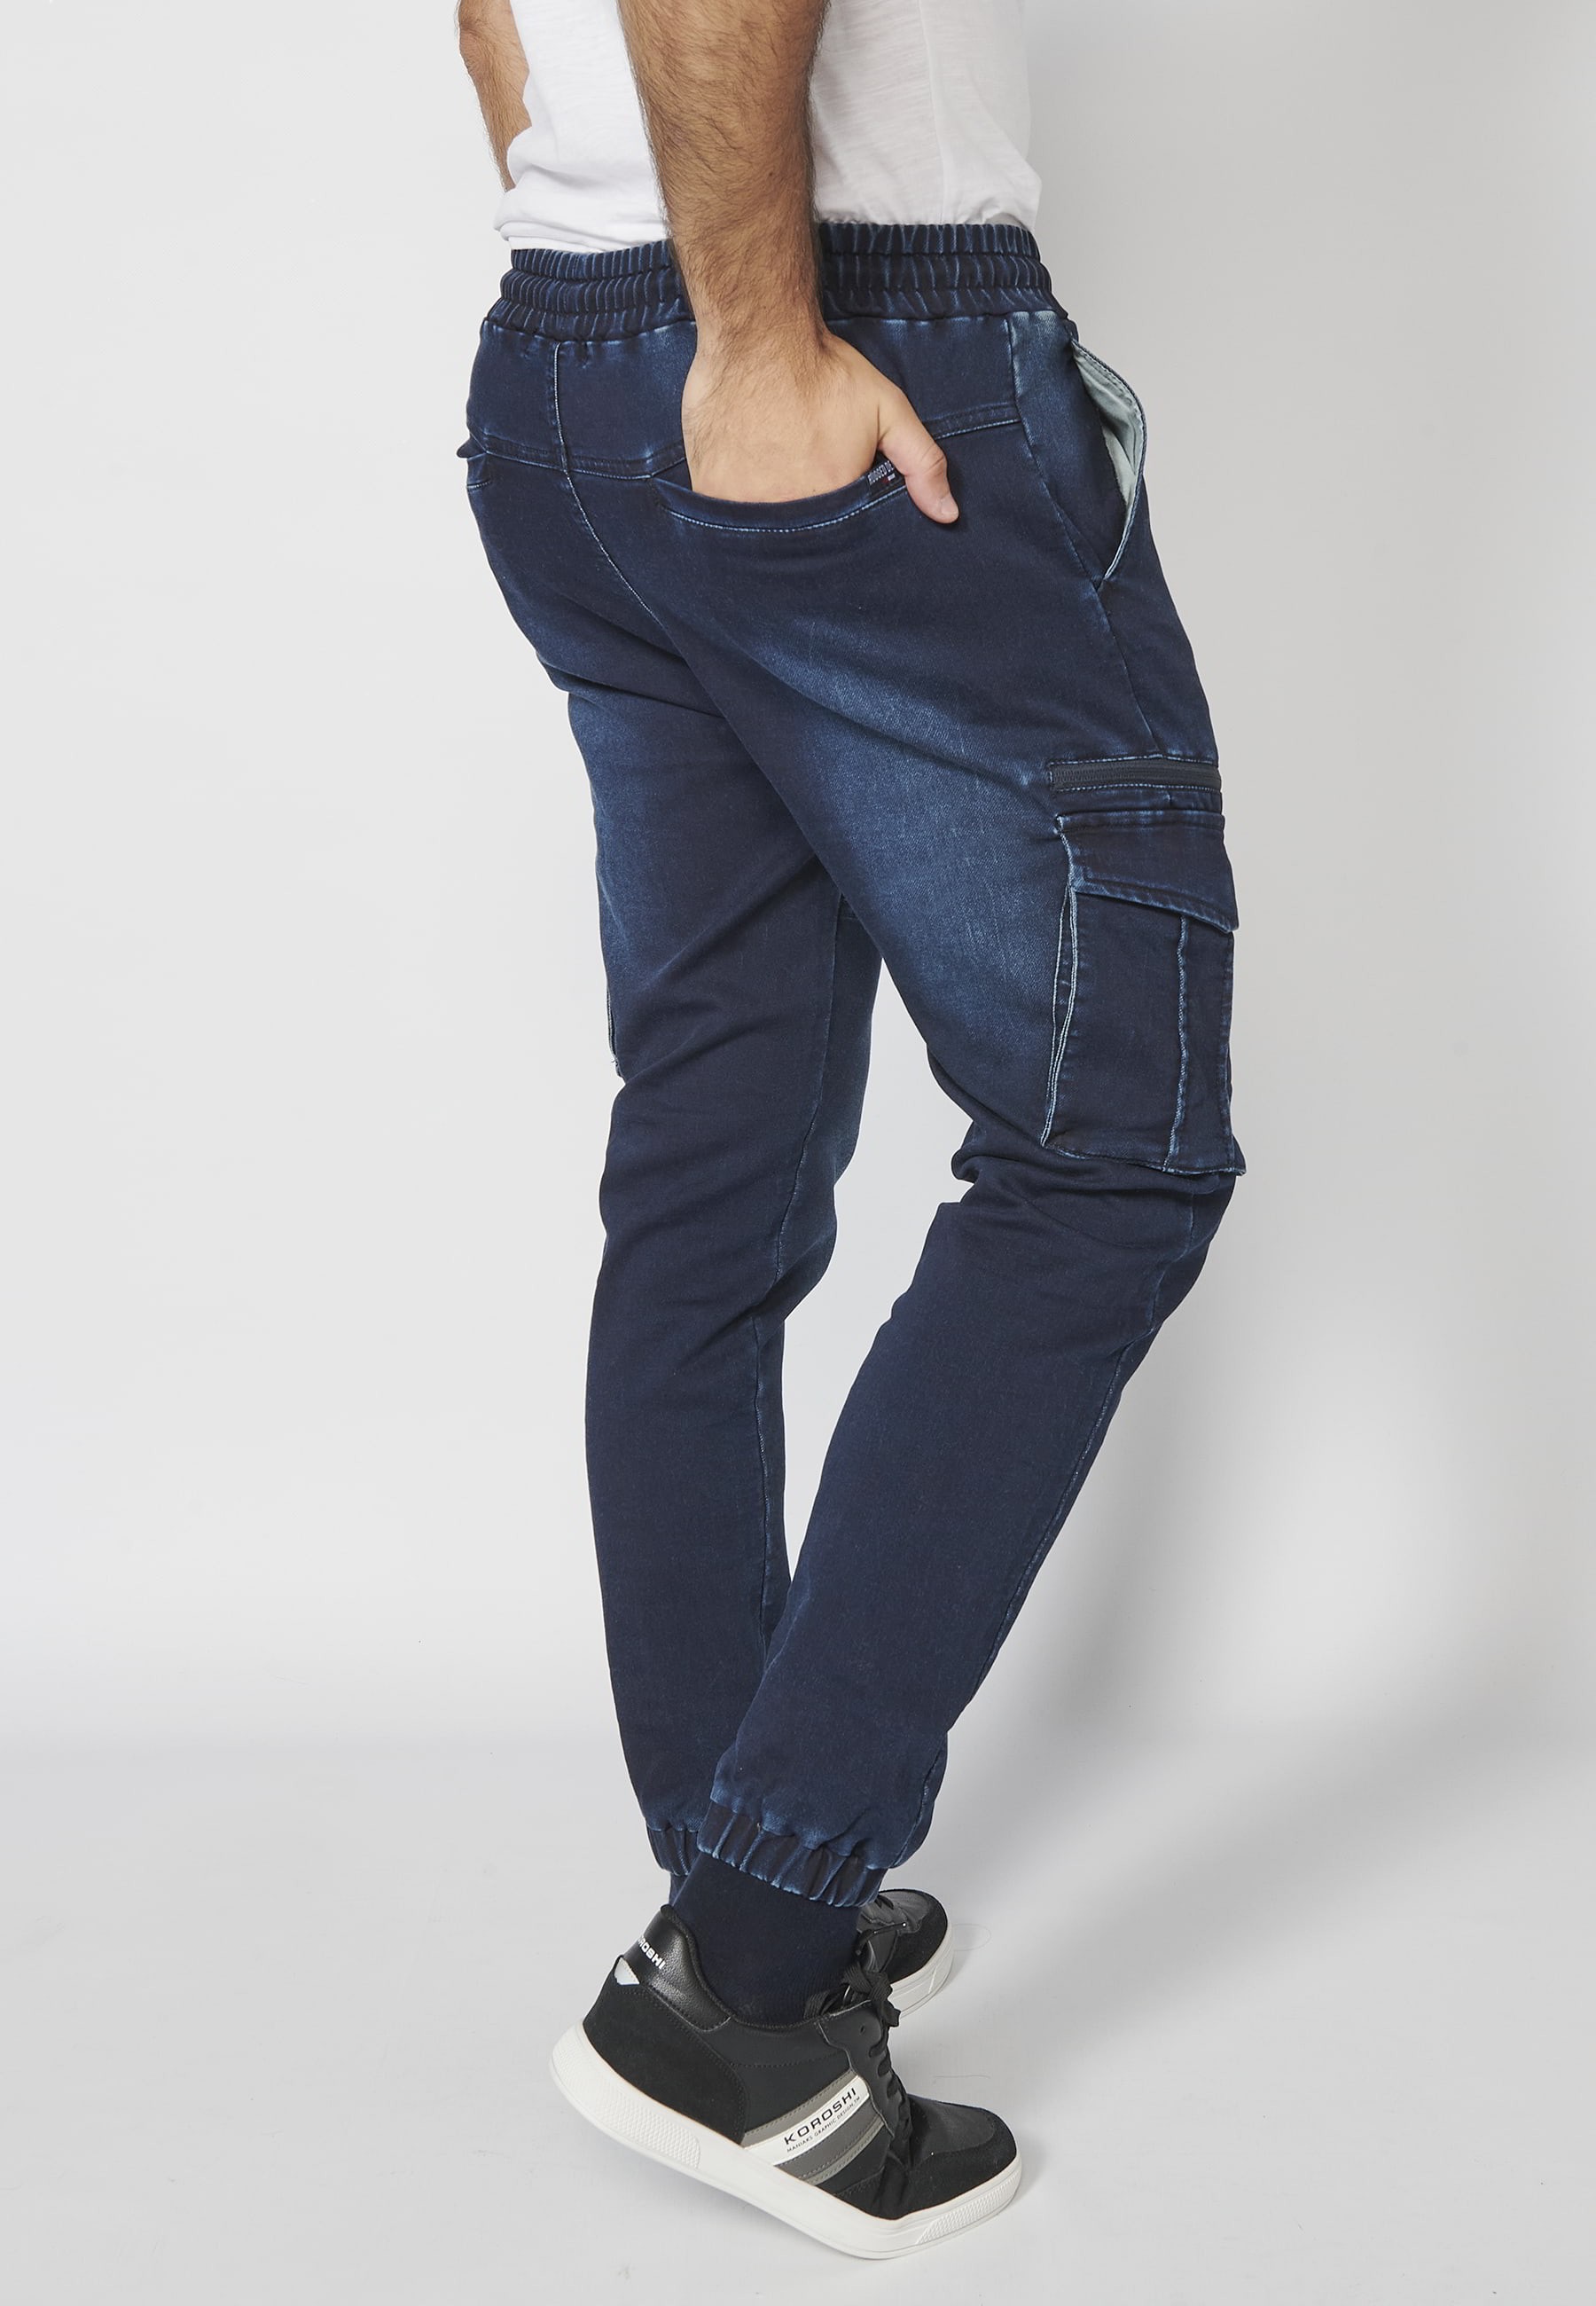 Long jogger pants with rubber finish and four pockets in Dark Blue color for Men